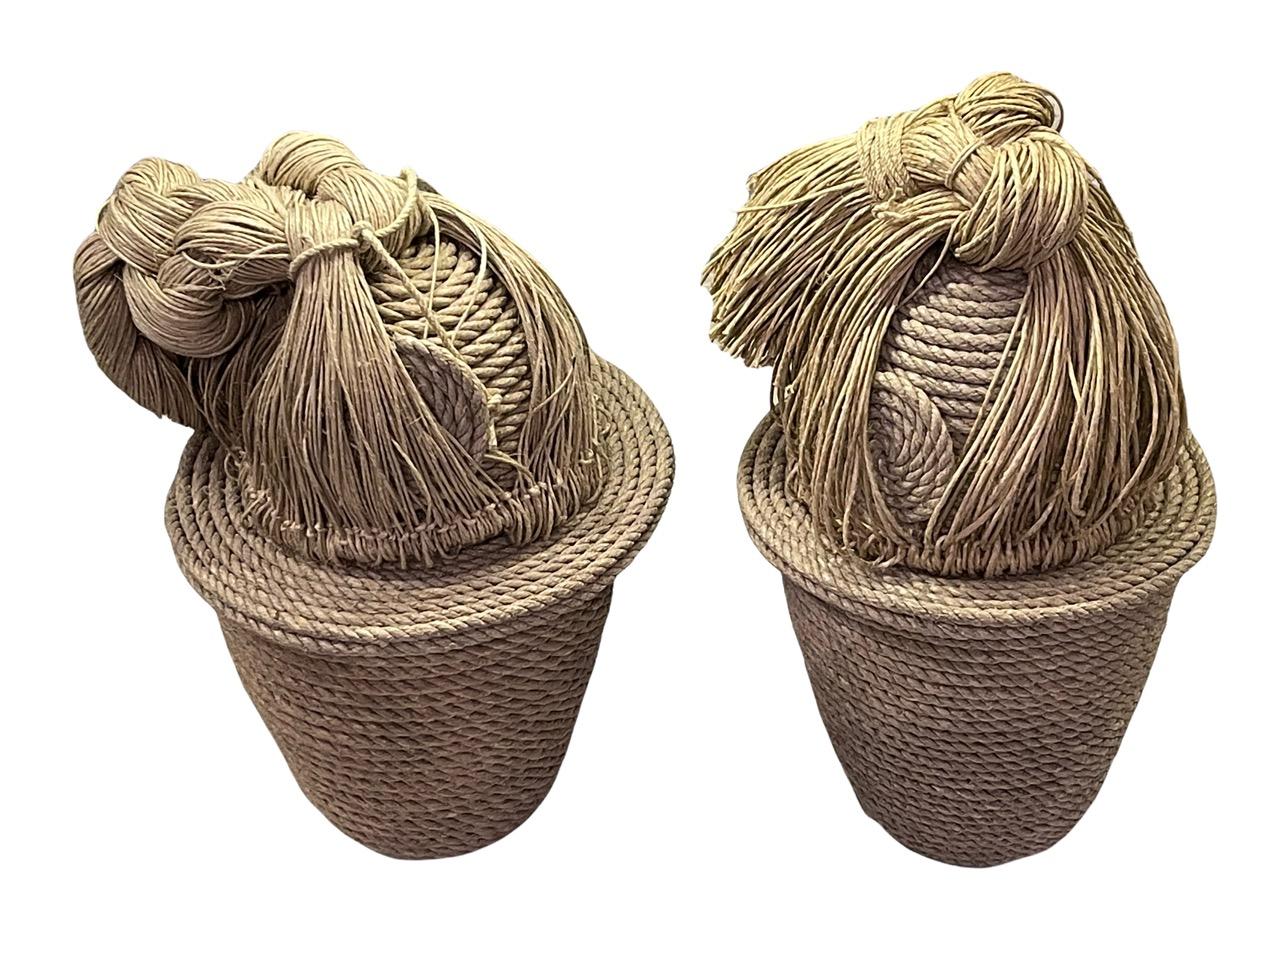 Pair of Contemporary 21st Century French Christian Astuguevieille Jute Rope Co In Fair Condition For Sale In North Miami, FL